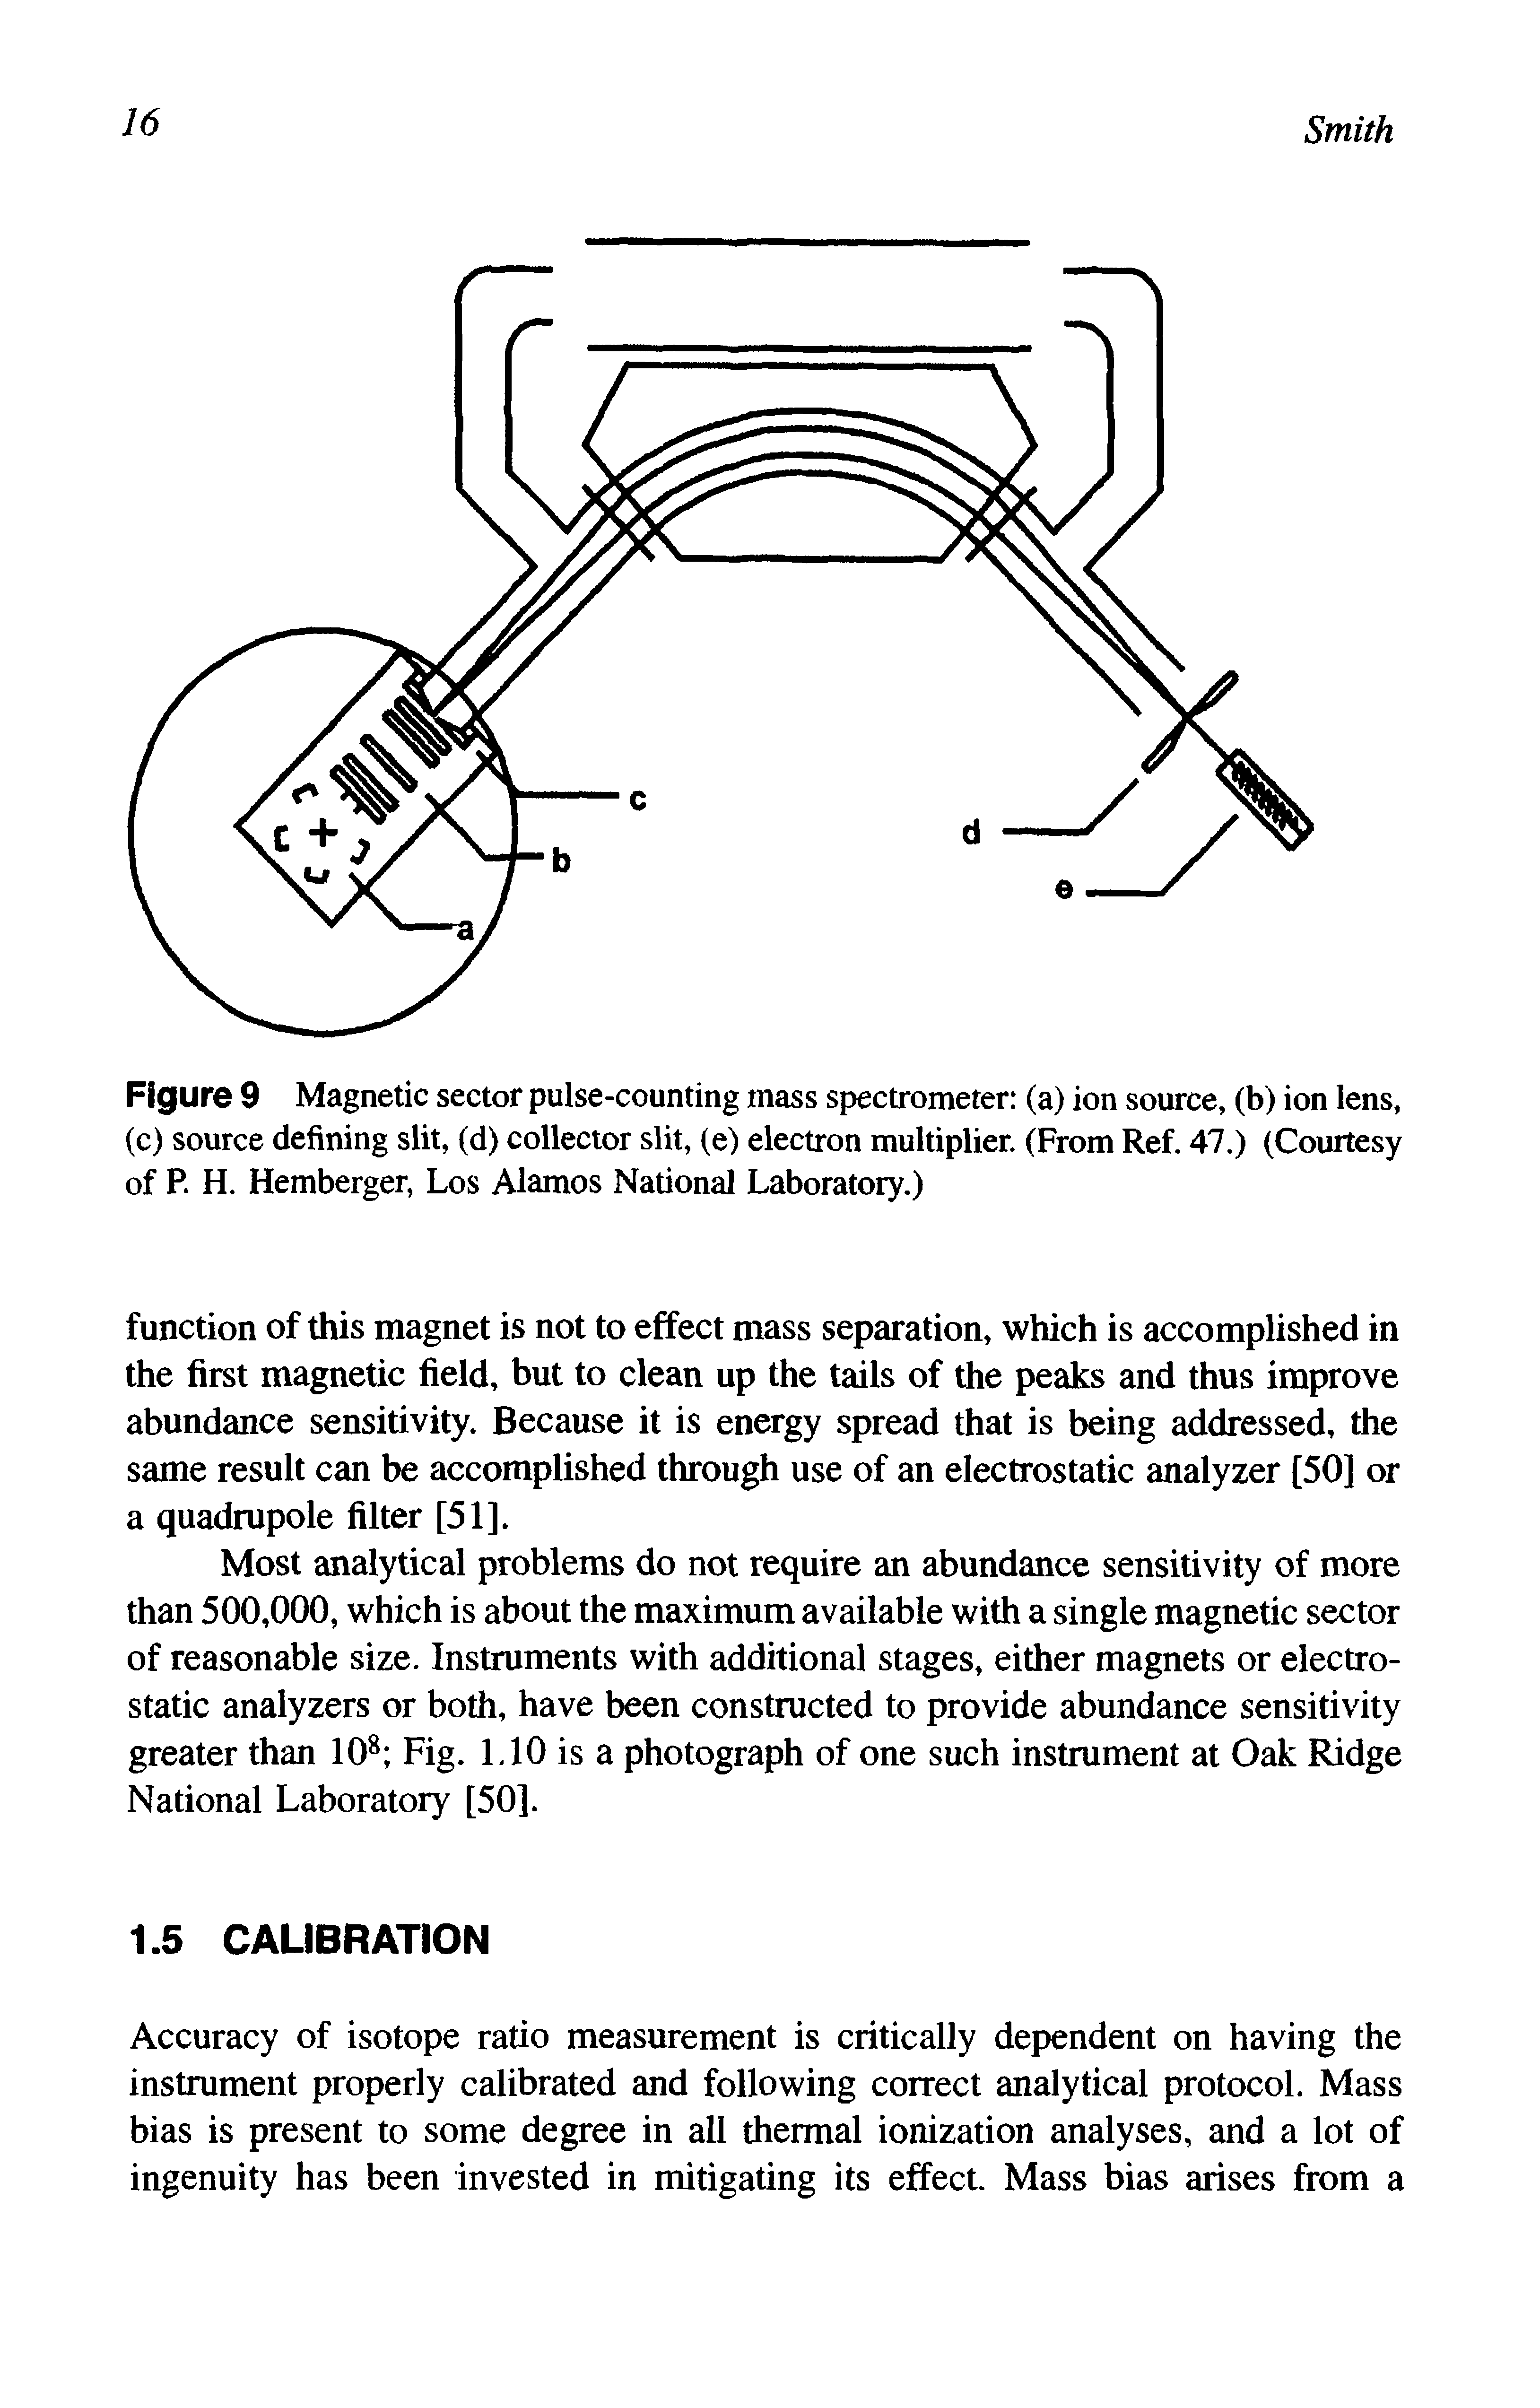 Figure 9 Magnetic sector pulse-counting mass spectrometer (a) ion source, (b) ion lens, (c) source defining slit, (d) collector slit, (e) electron multiplier. (From Ref. 47.) (Courtesy of R H. Hemberger, Los Alamos National Laboratory.)...